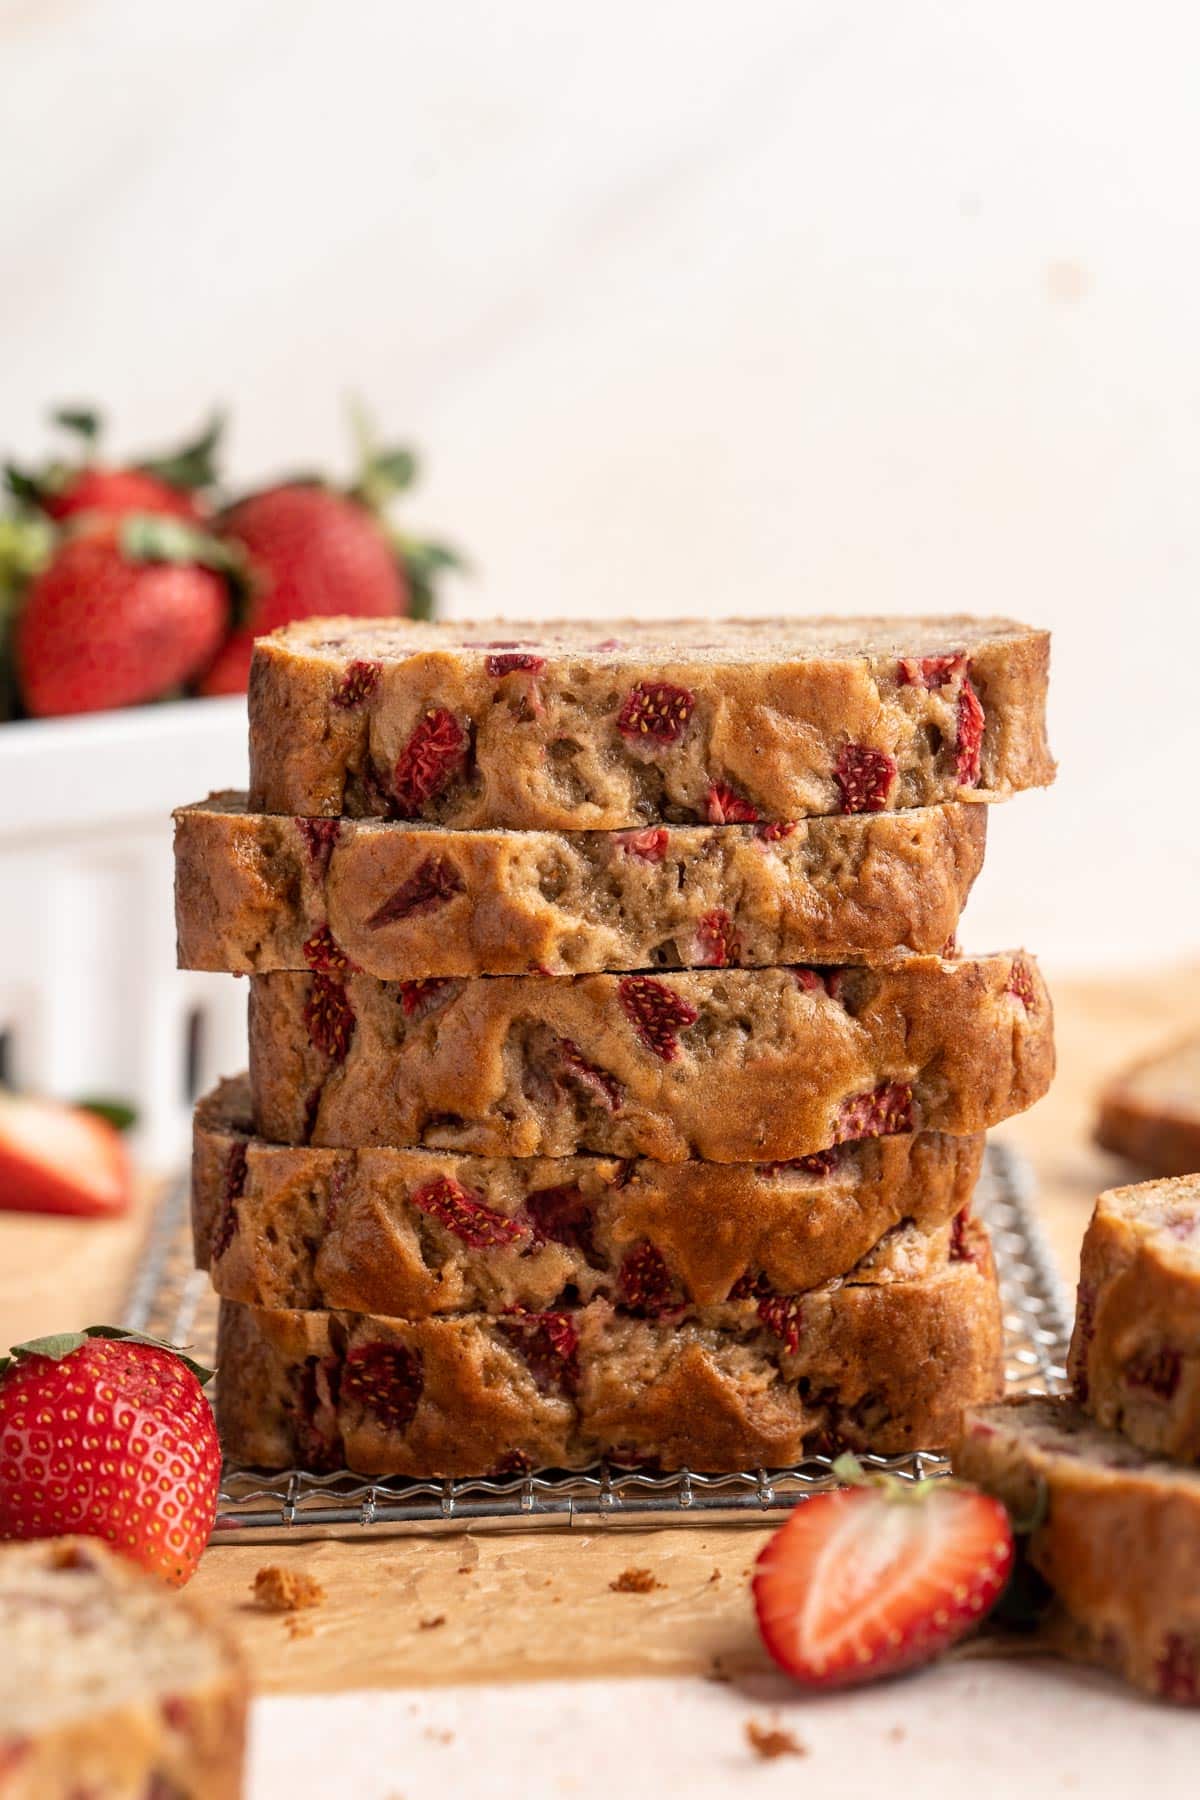 Slices of bread with strawberries stacked near fresh strawberries.